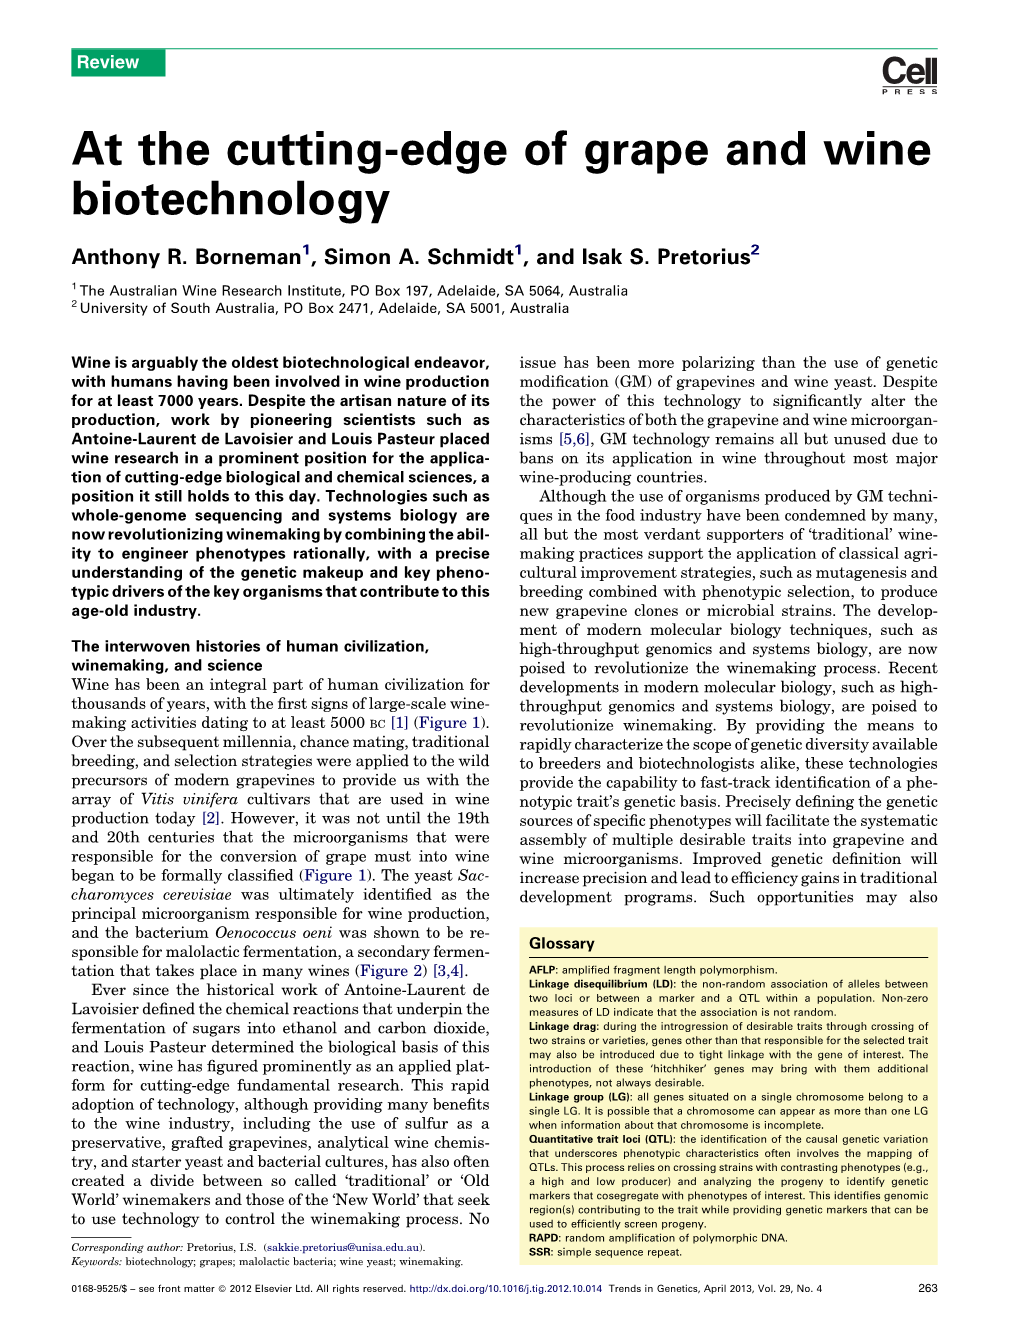 At the Cutting-Edge of Grape and Wine Biotechnology